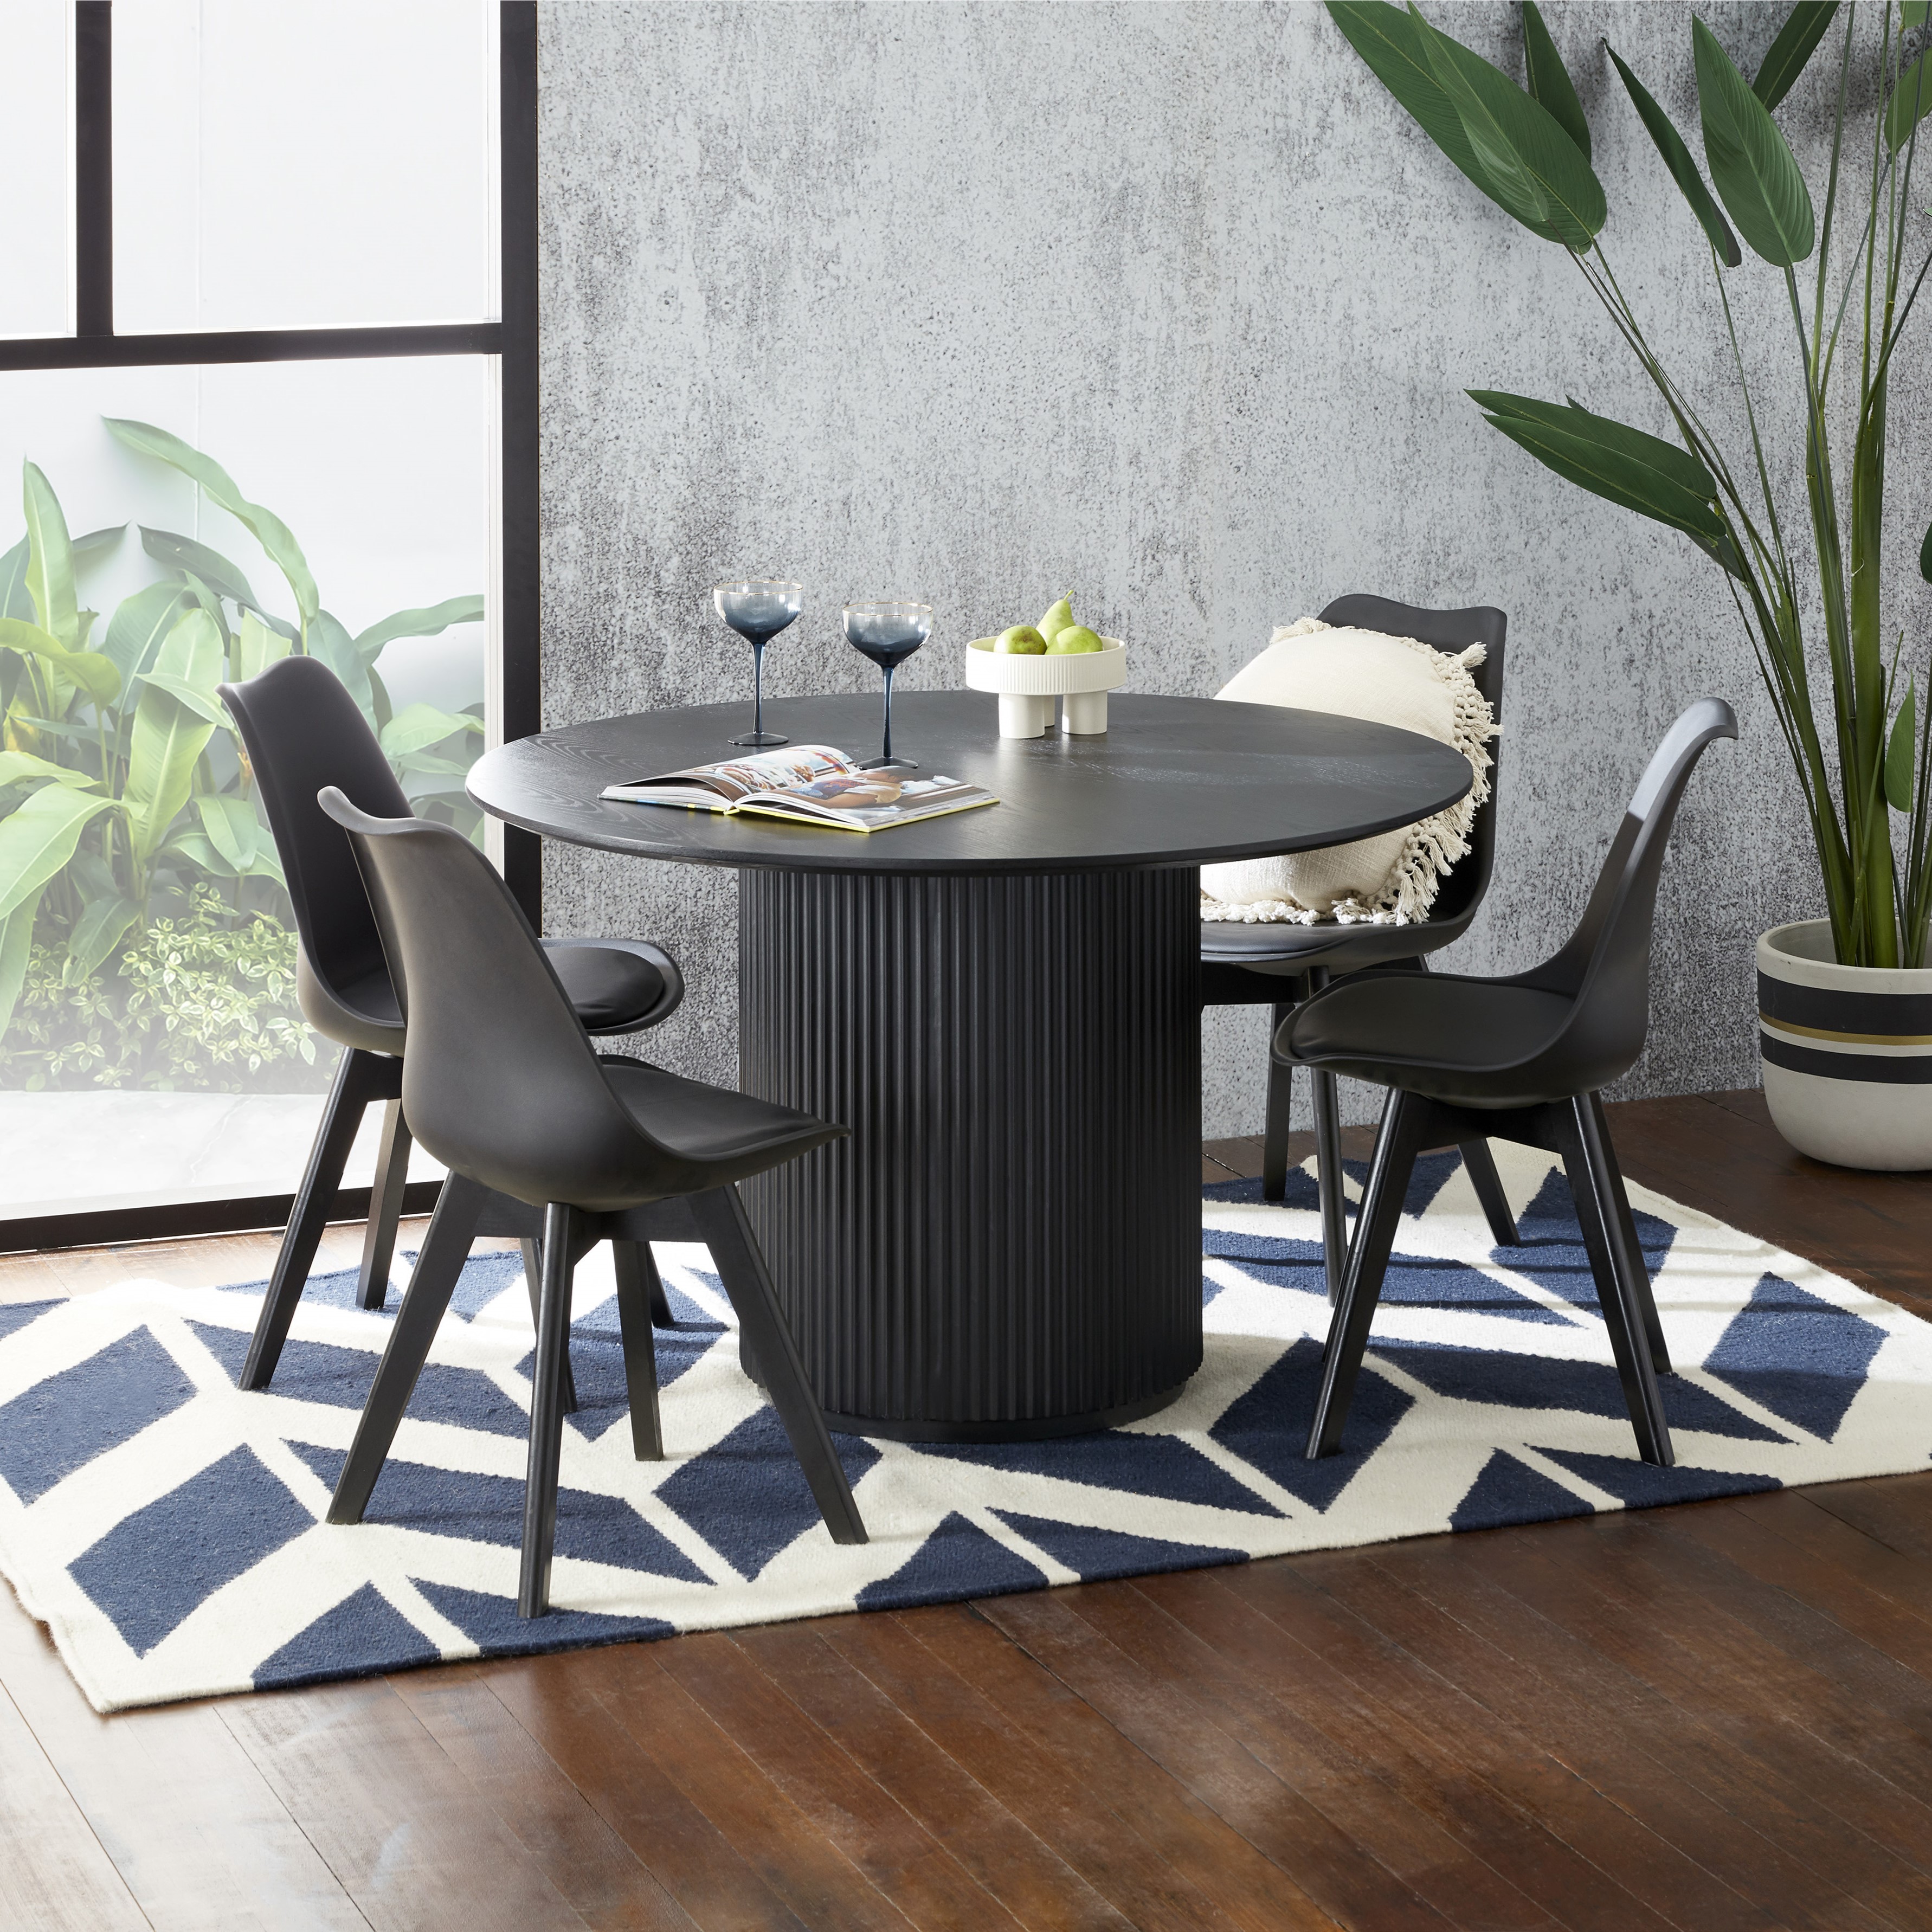 Larsa round dining suite with Vibe chairs